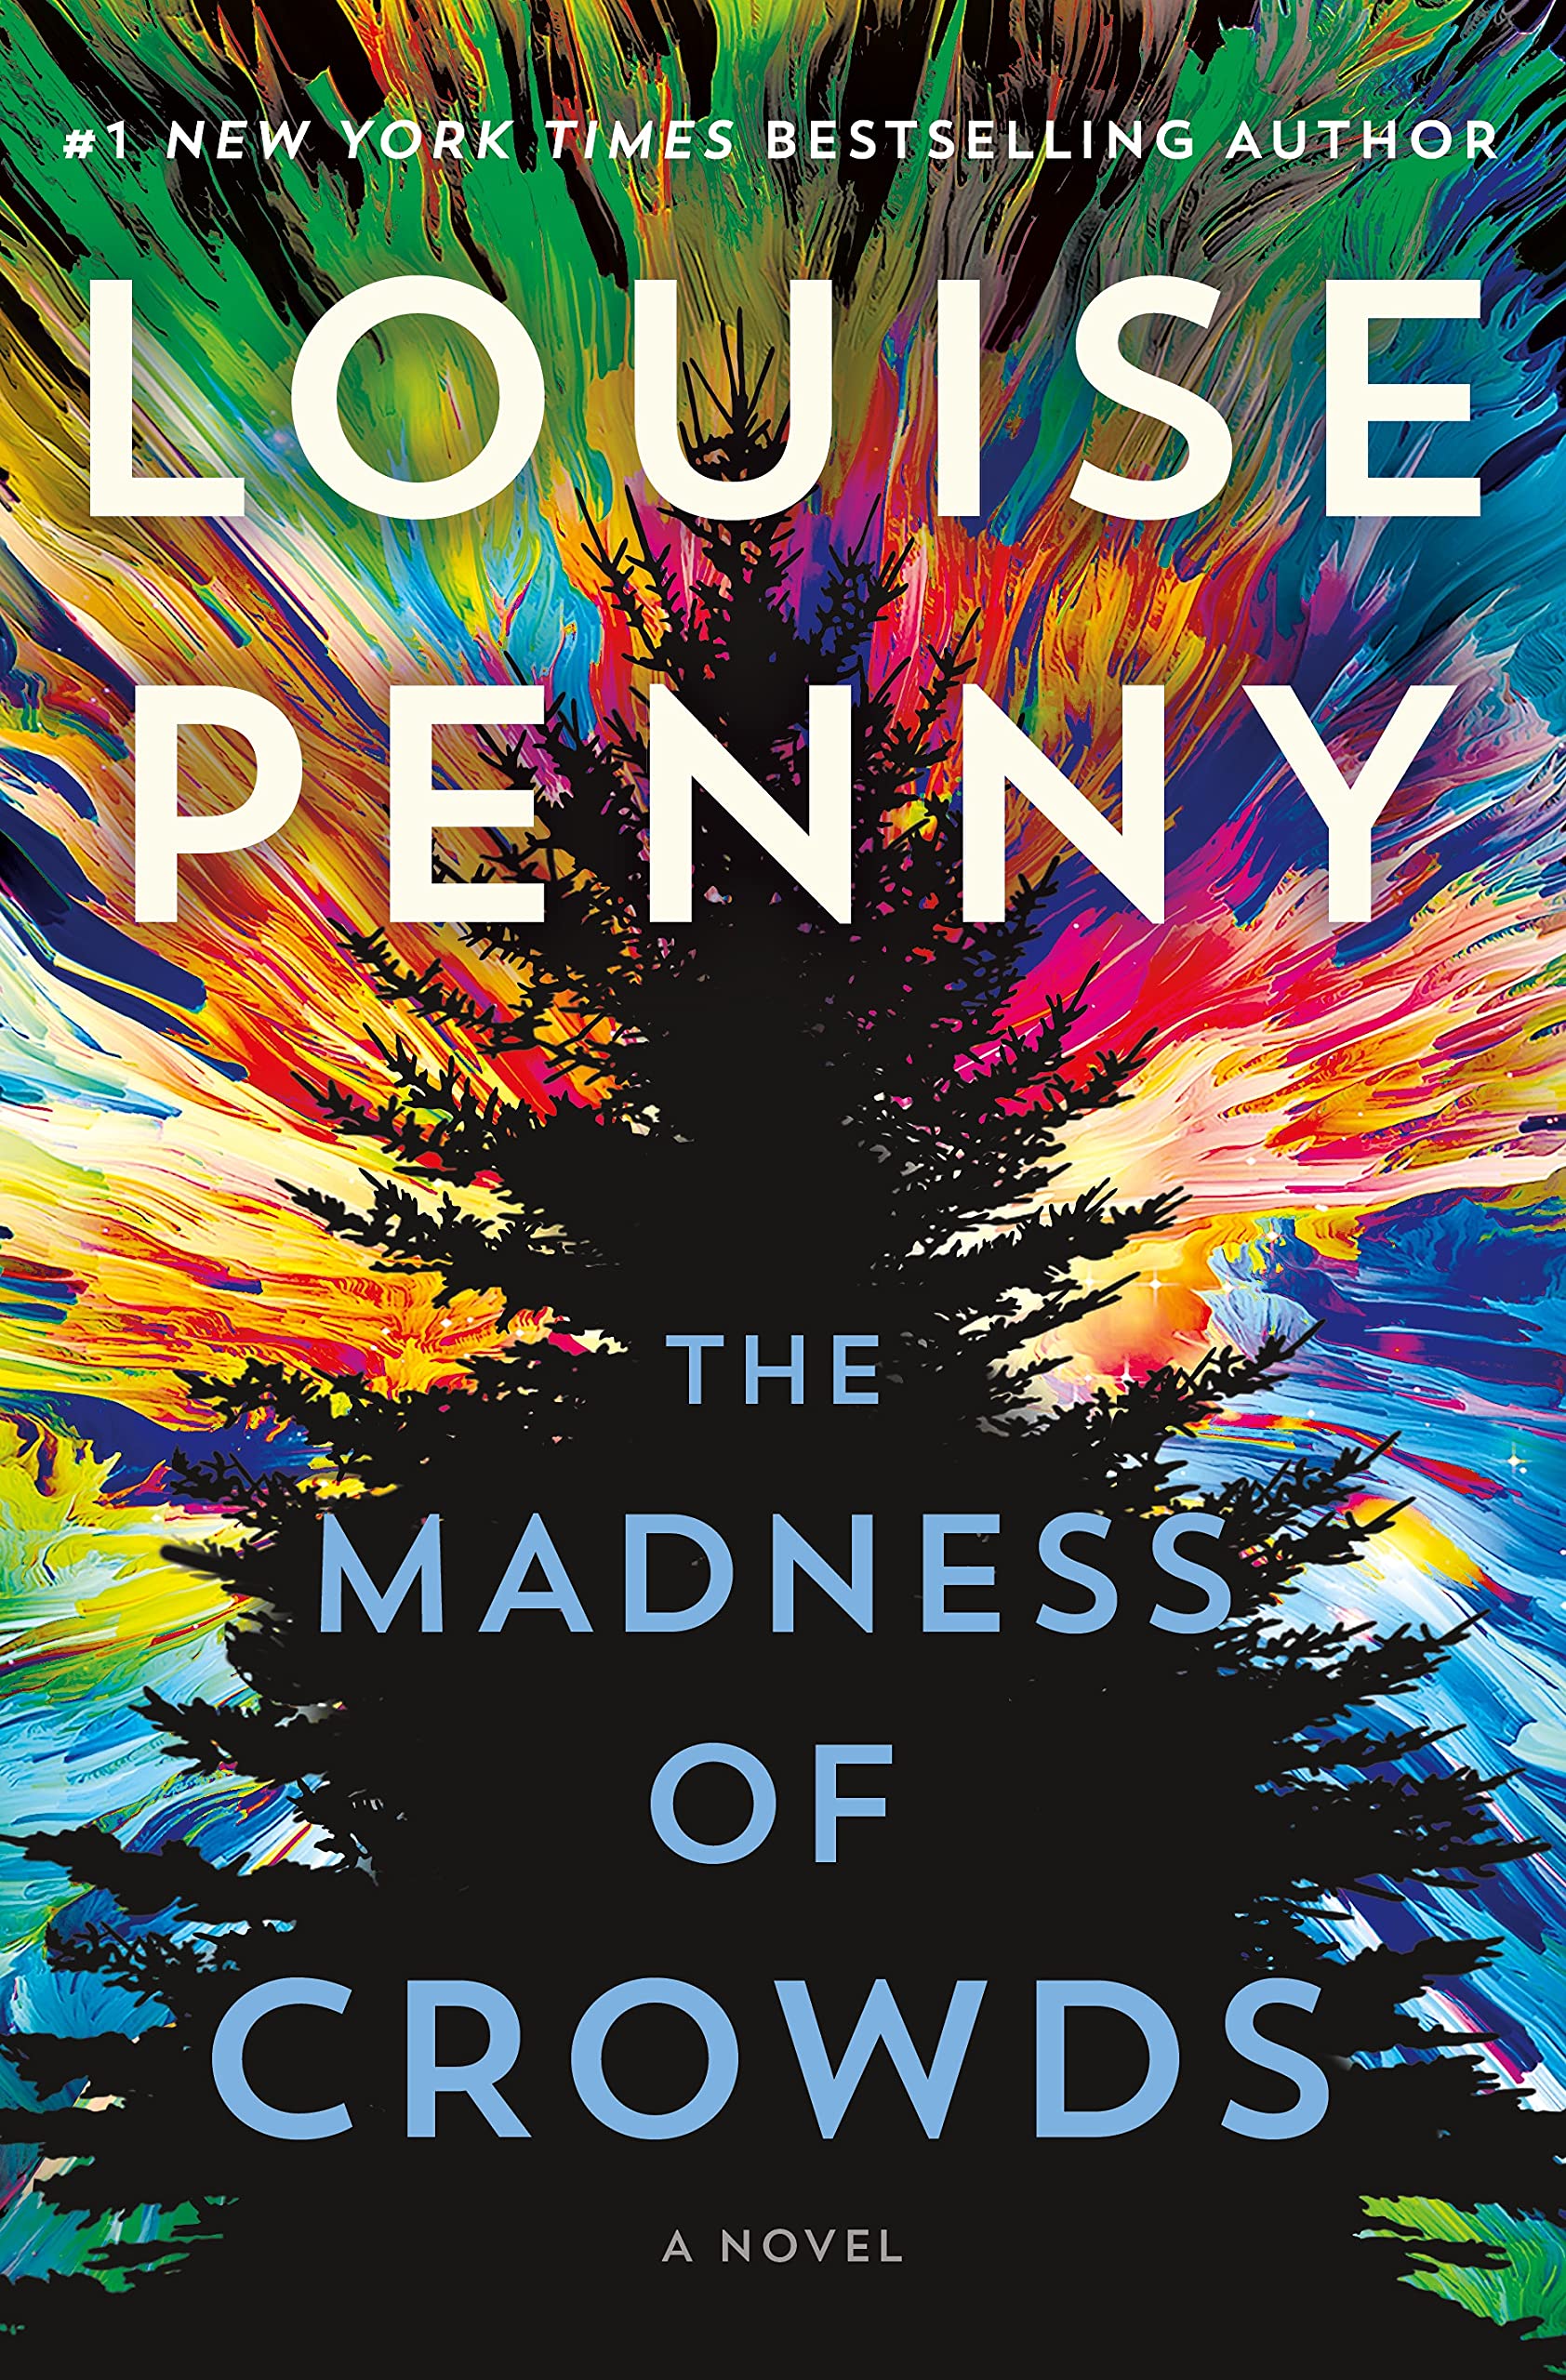 Louise Penny's 'The Madness of Crowds' Tops Holds Lists | Book Pulse